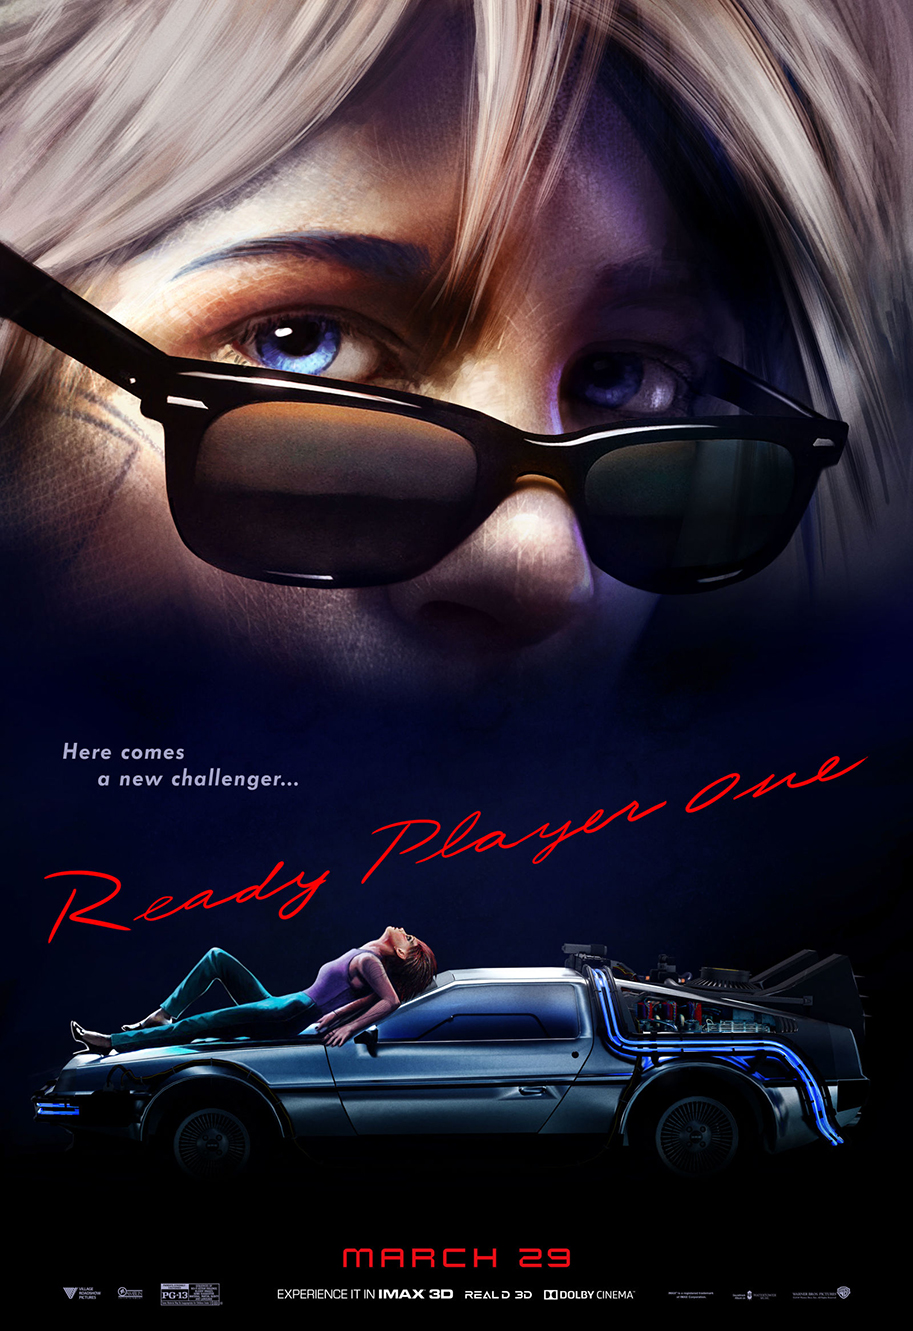 Ready Player One movie poster (e) - 11 x 17 - Back To The Future